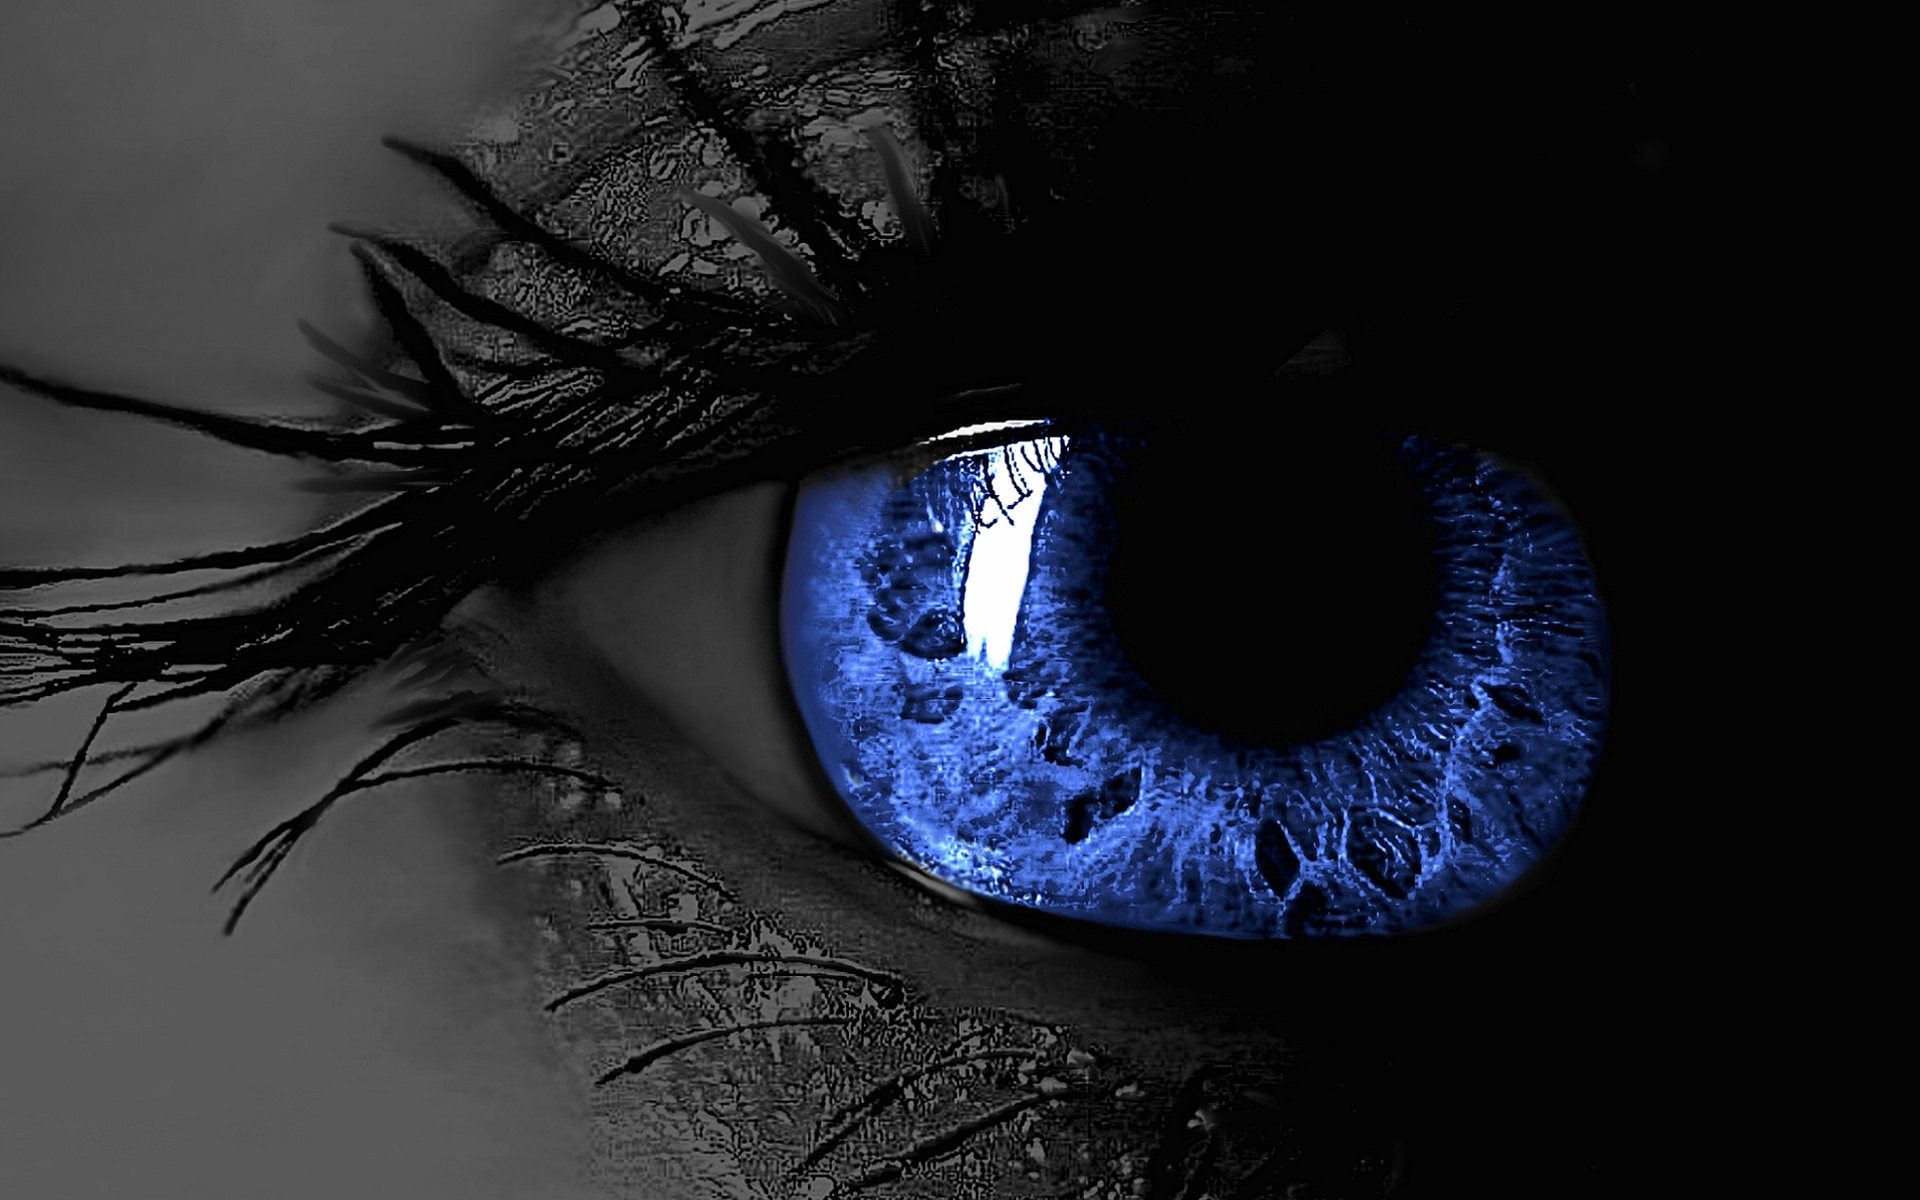 Blue Eyes Photos, Download The BEST Free Blue Eyes Stock Photos & HD Images